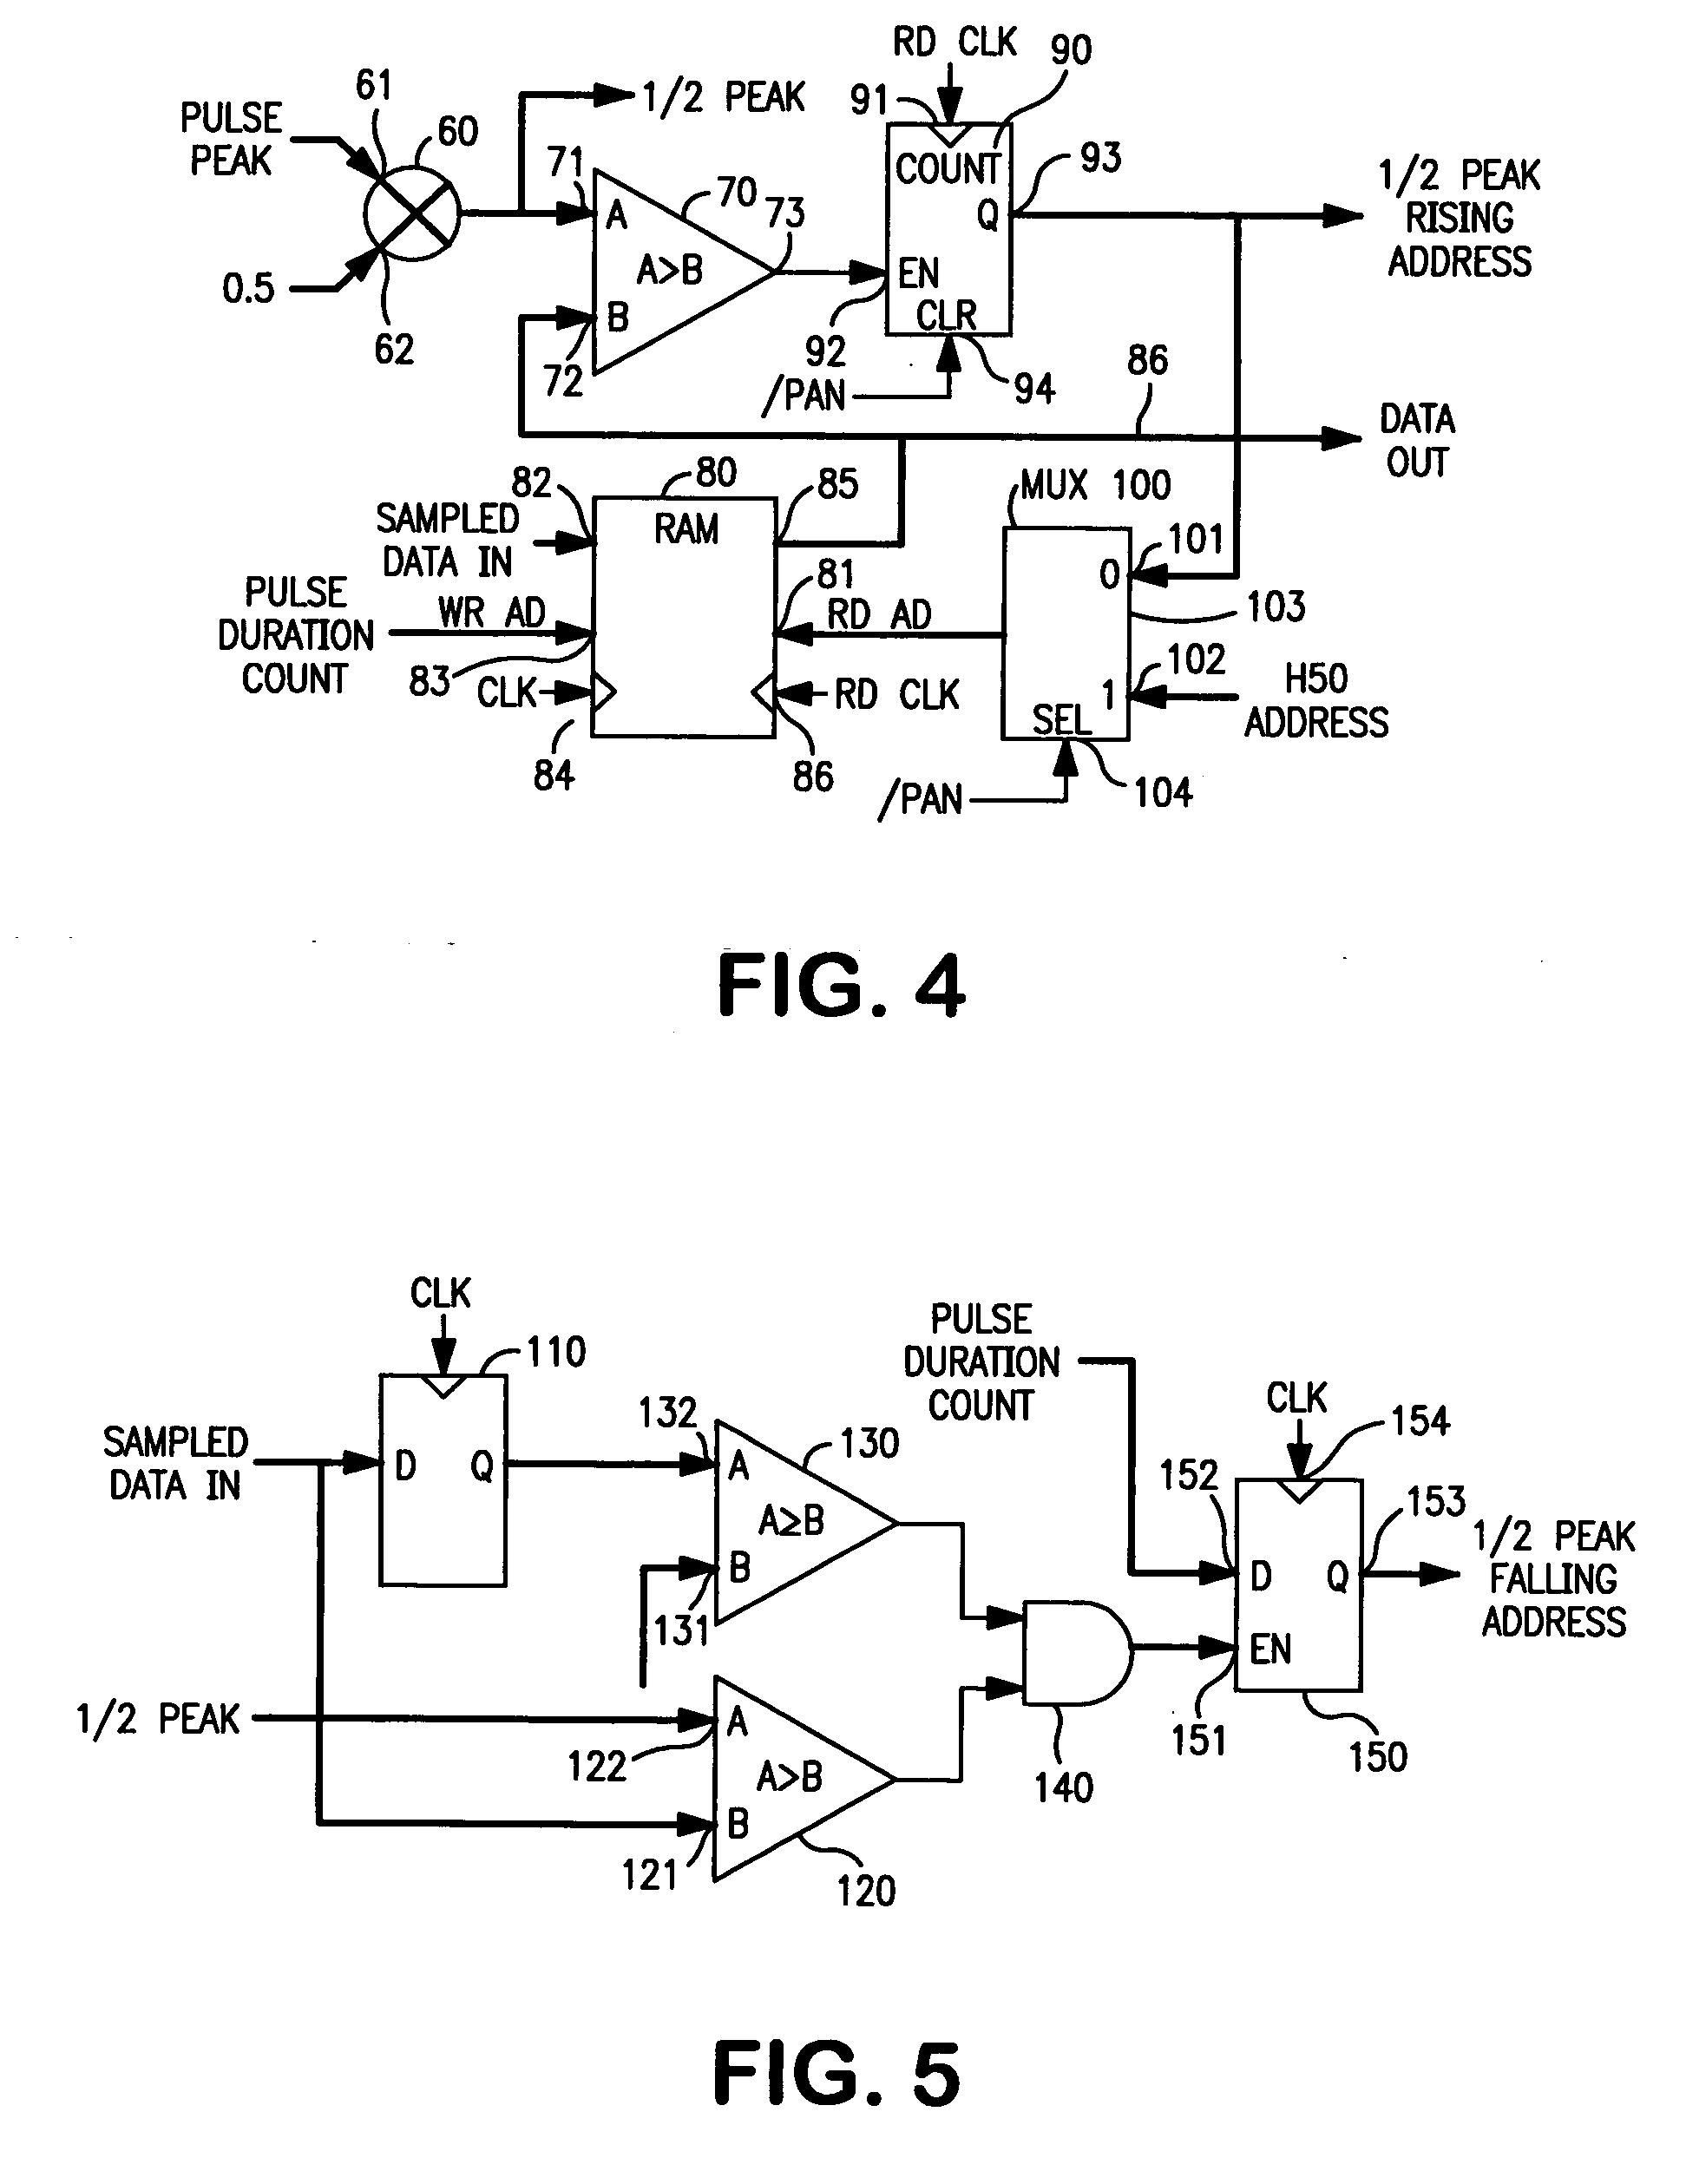 Method and apparatus for finding center amplitude of particle size-representative pulses produced by aperture based sizing system